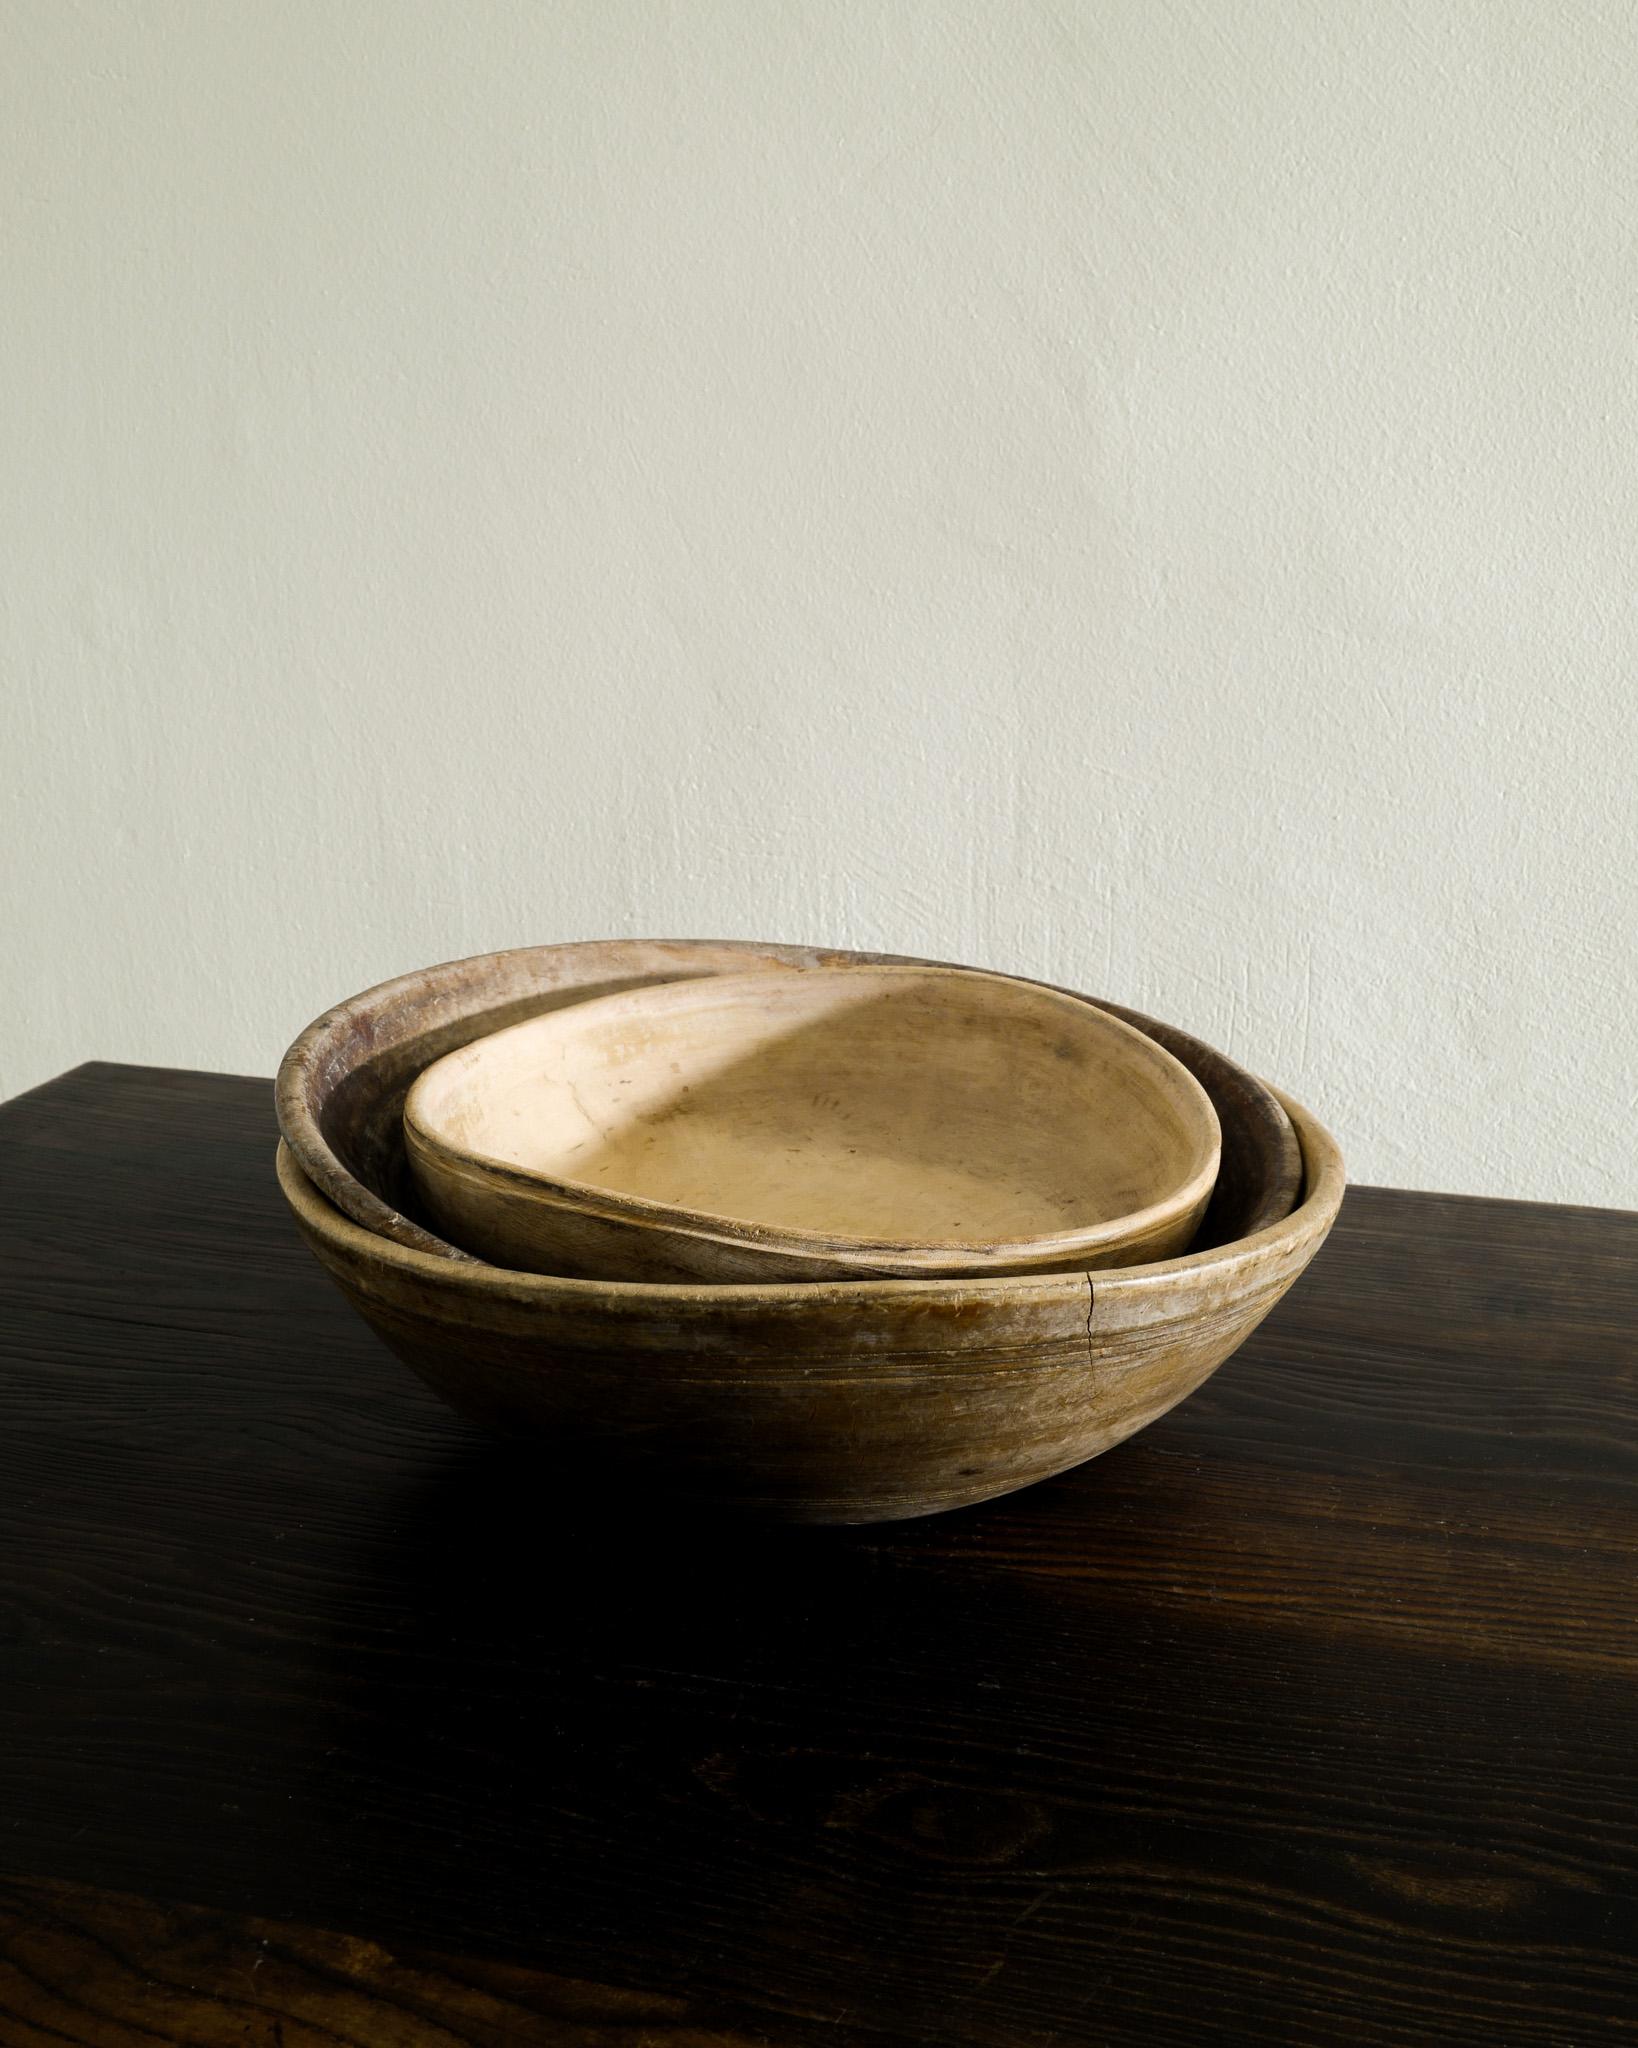 Rare set of three decorative antique wooden bowls produced in Sweden late 1800s. In good original condition with patina from age and use. 

Dimensions: 
Small: H: 7 cm Diameter: 25 cm 
Medium: H: 7 cm Diameter: 32 cm 
Large: H: 10 cm Diameter: 35 cm 